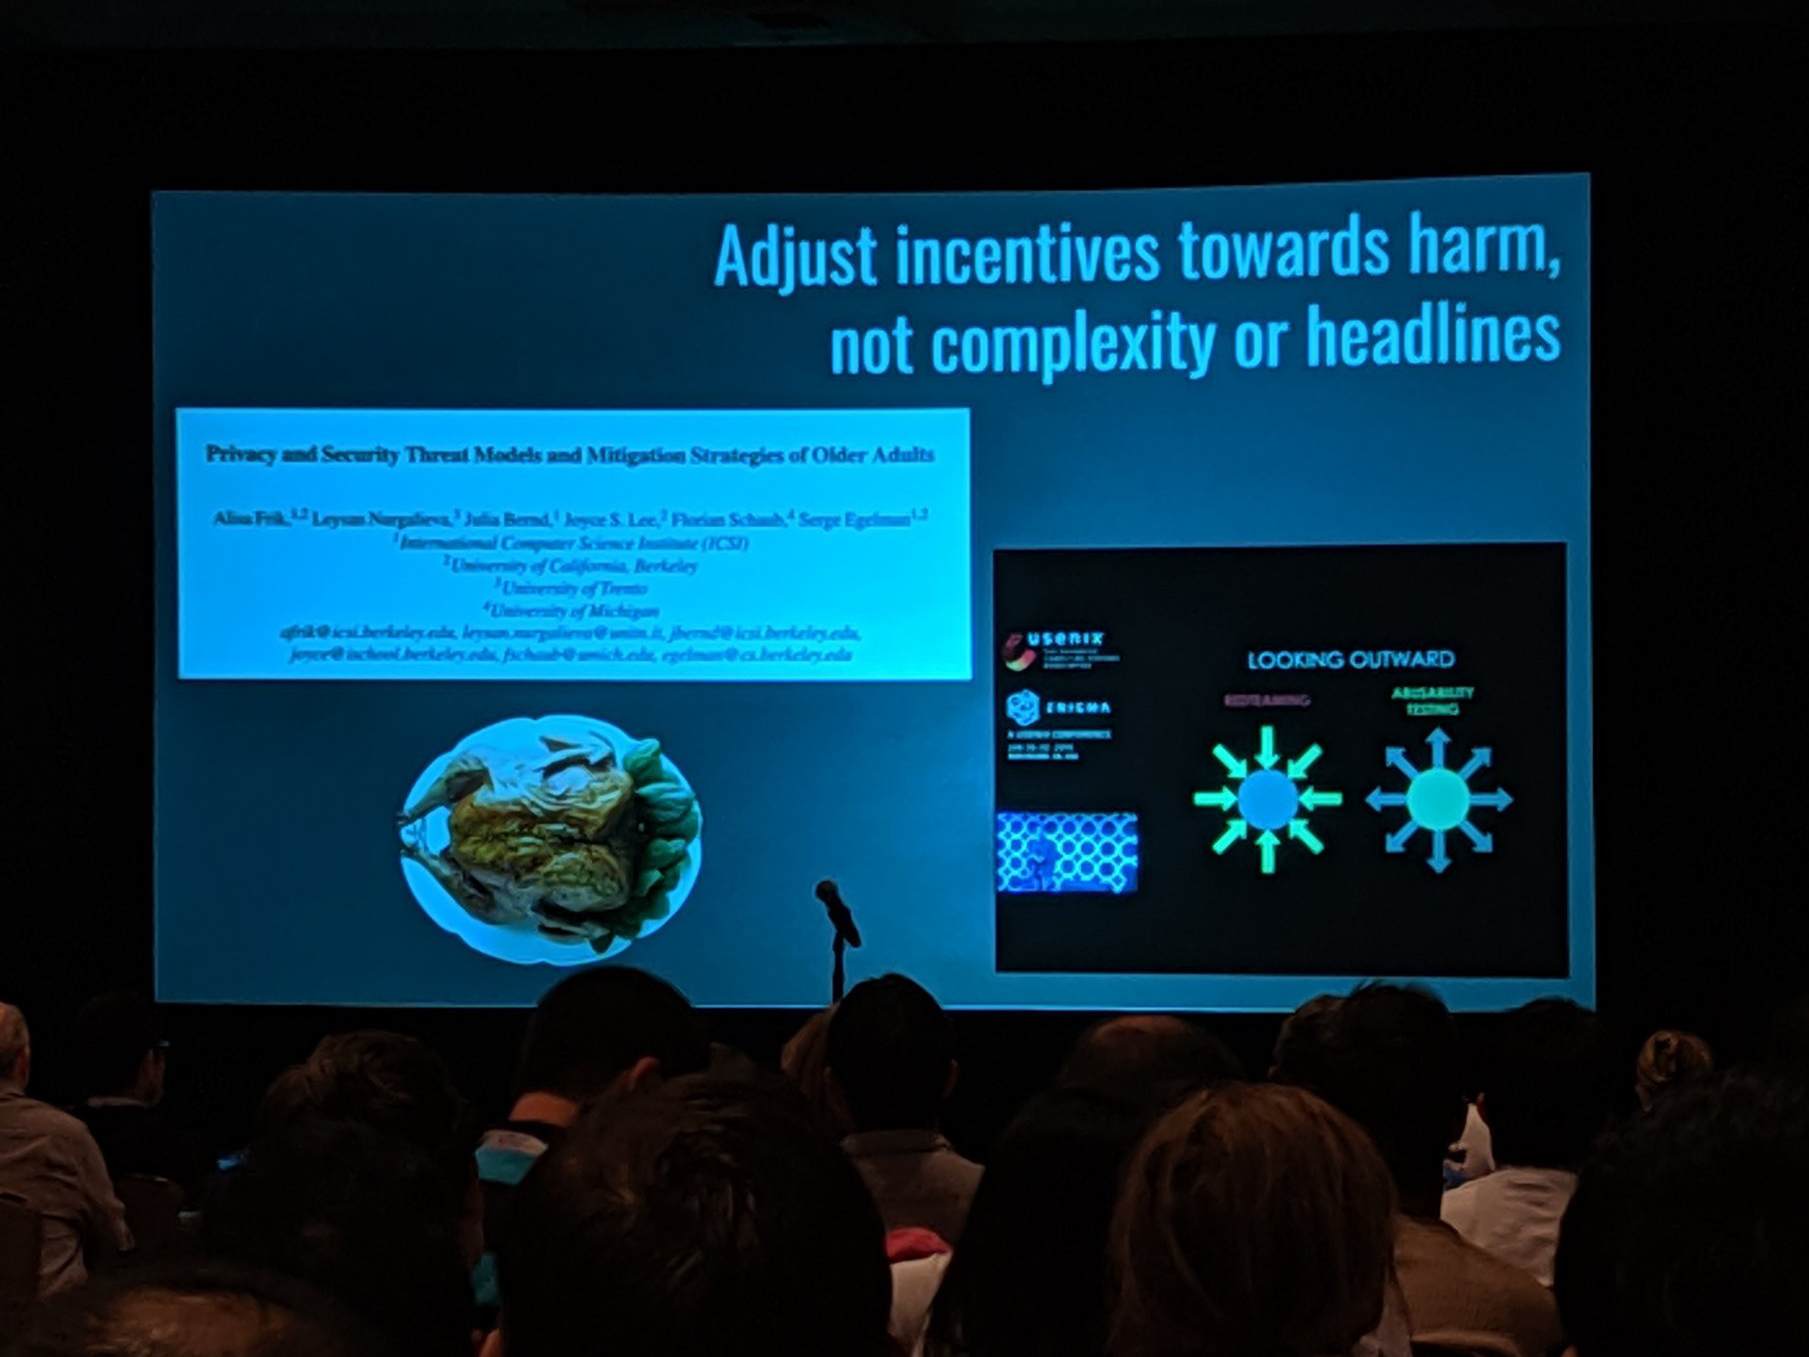 A slide projected in a dark room in front of a crowd. The slide reads 'Adjust incentives toward harm, not complexity or headlines'